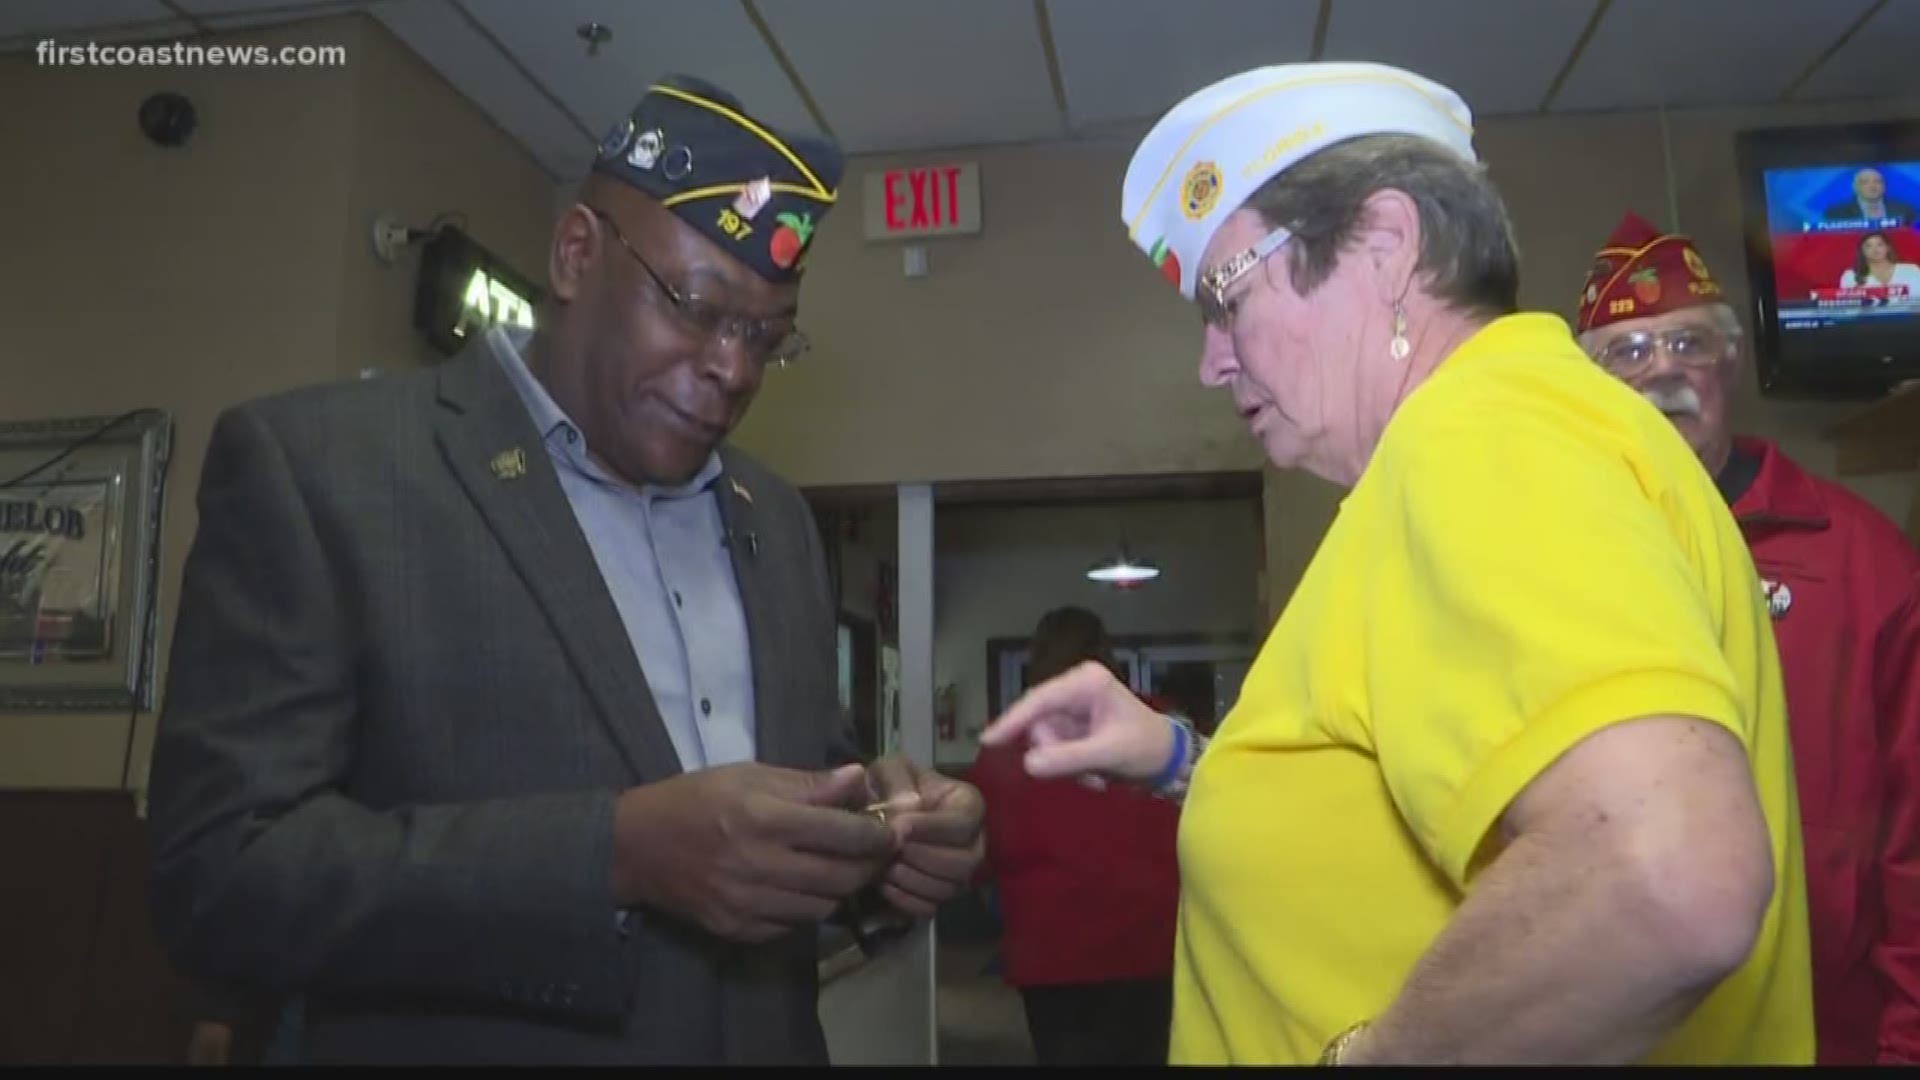 First Coast News visited the American Legion Post 197 in Jacksonville to see how the organization is fundraising for repairs, all while the Florida branch adds to its own history.